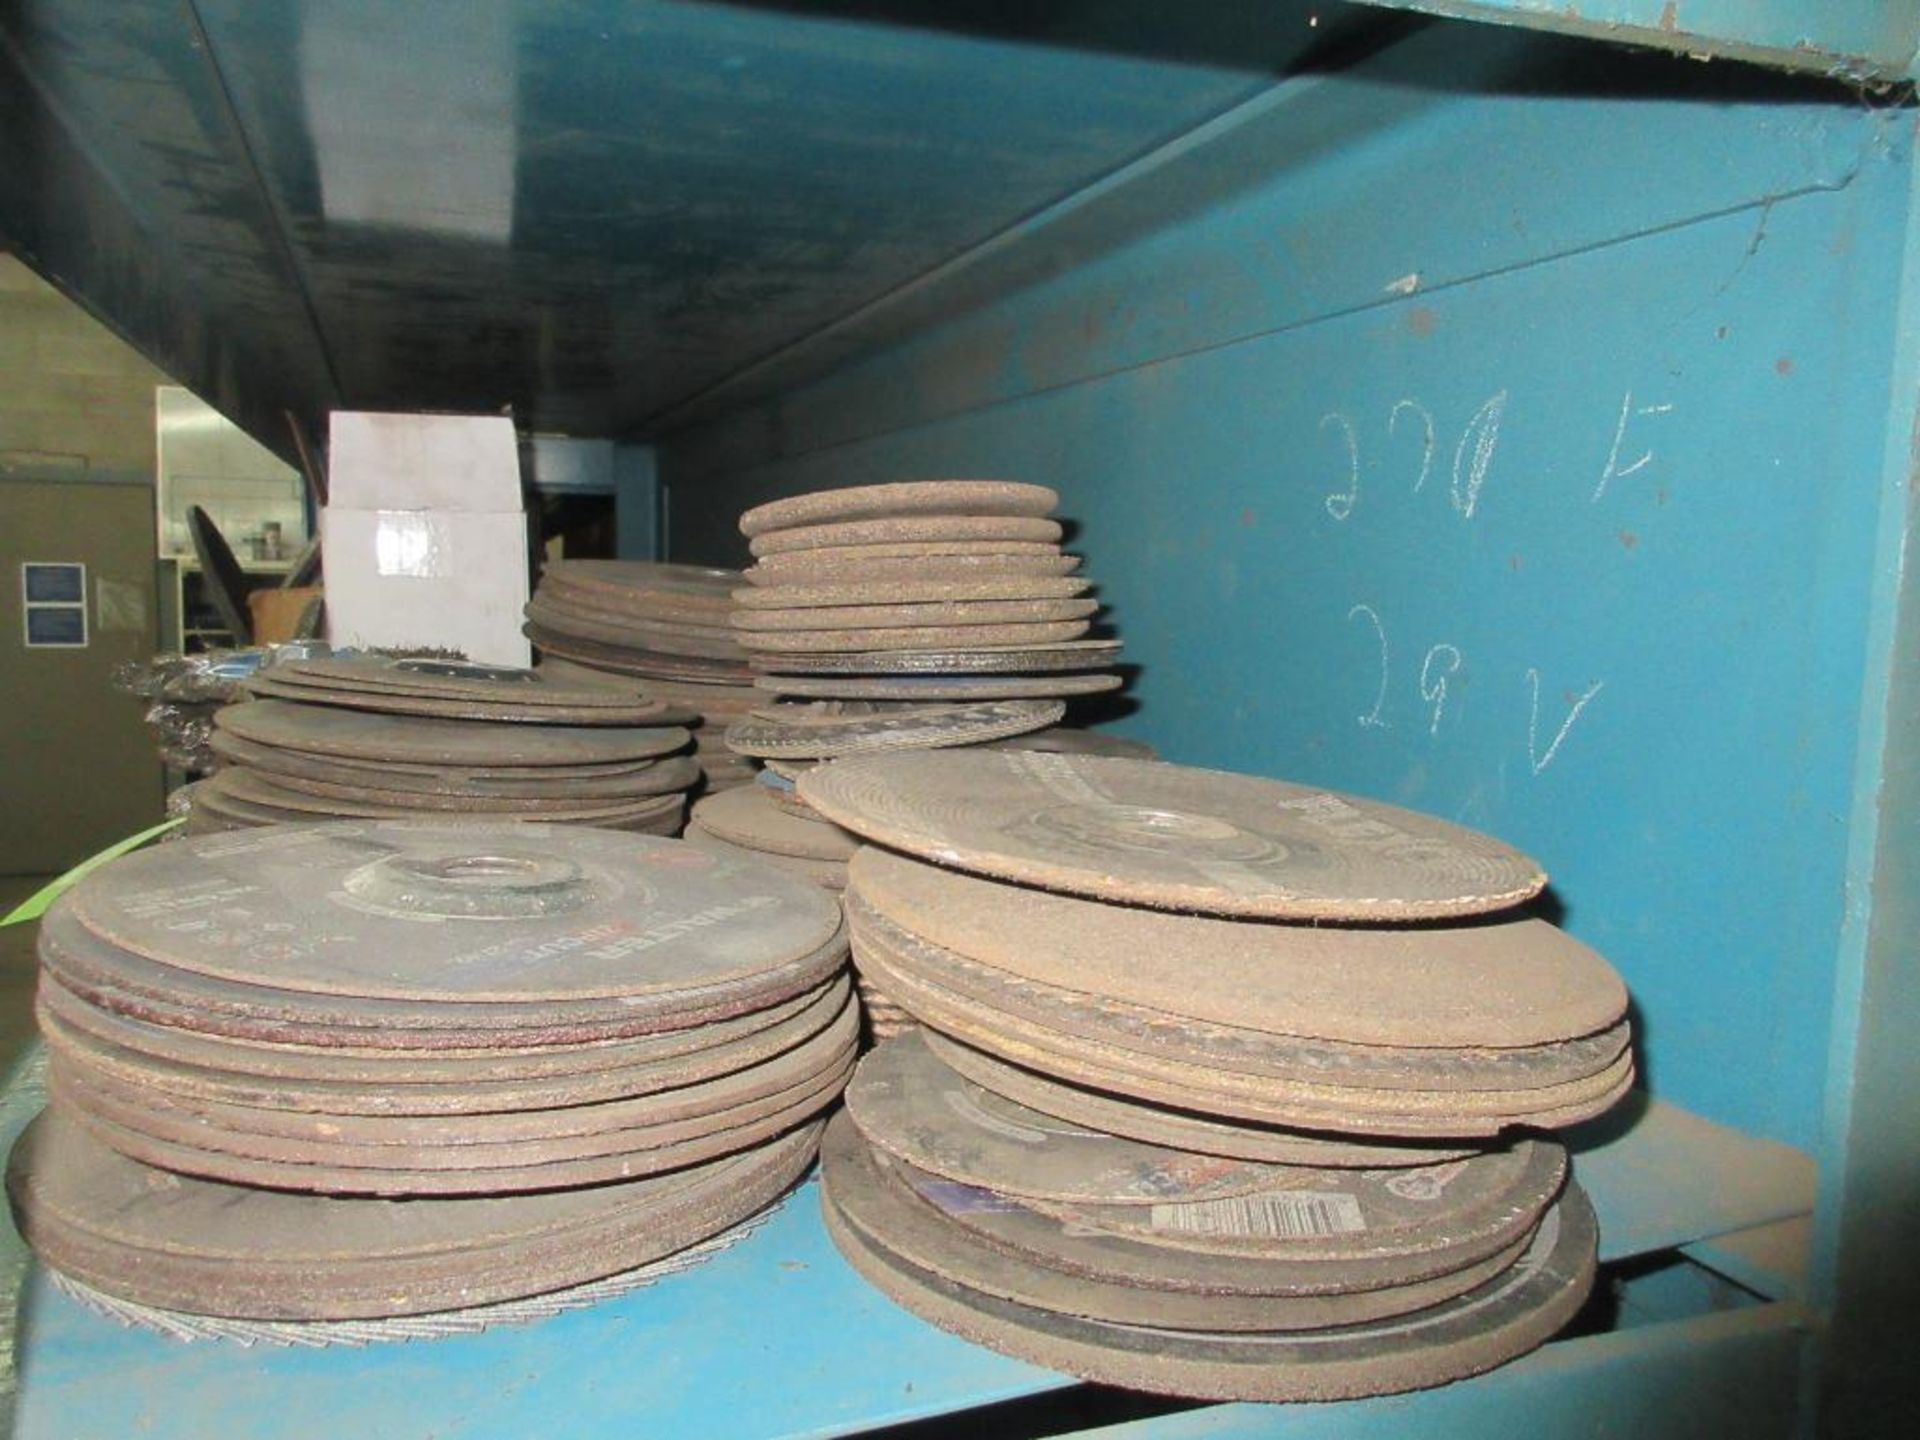 LOT OF WIRE WHEEL AND GRINDING DISKS (7" AND 5") (IN CENTRAL TOOL CRIB) - Image 3 of 3